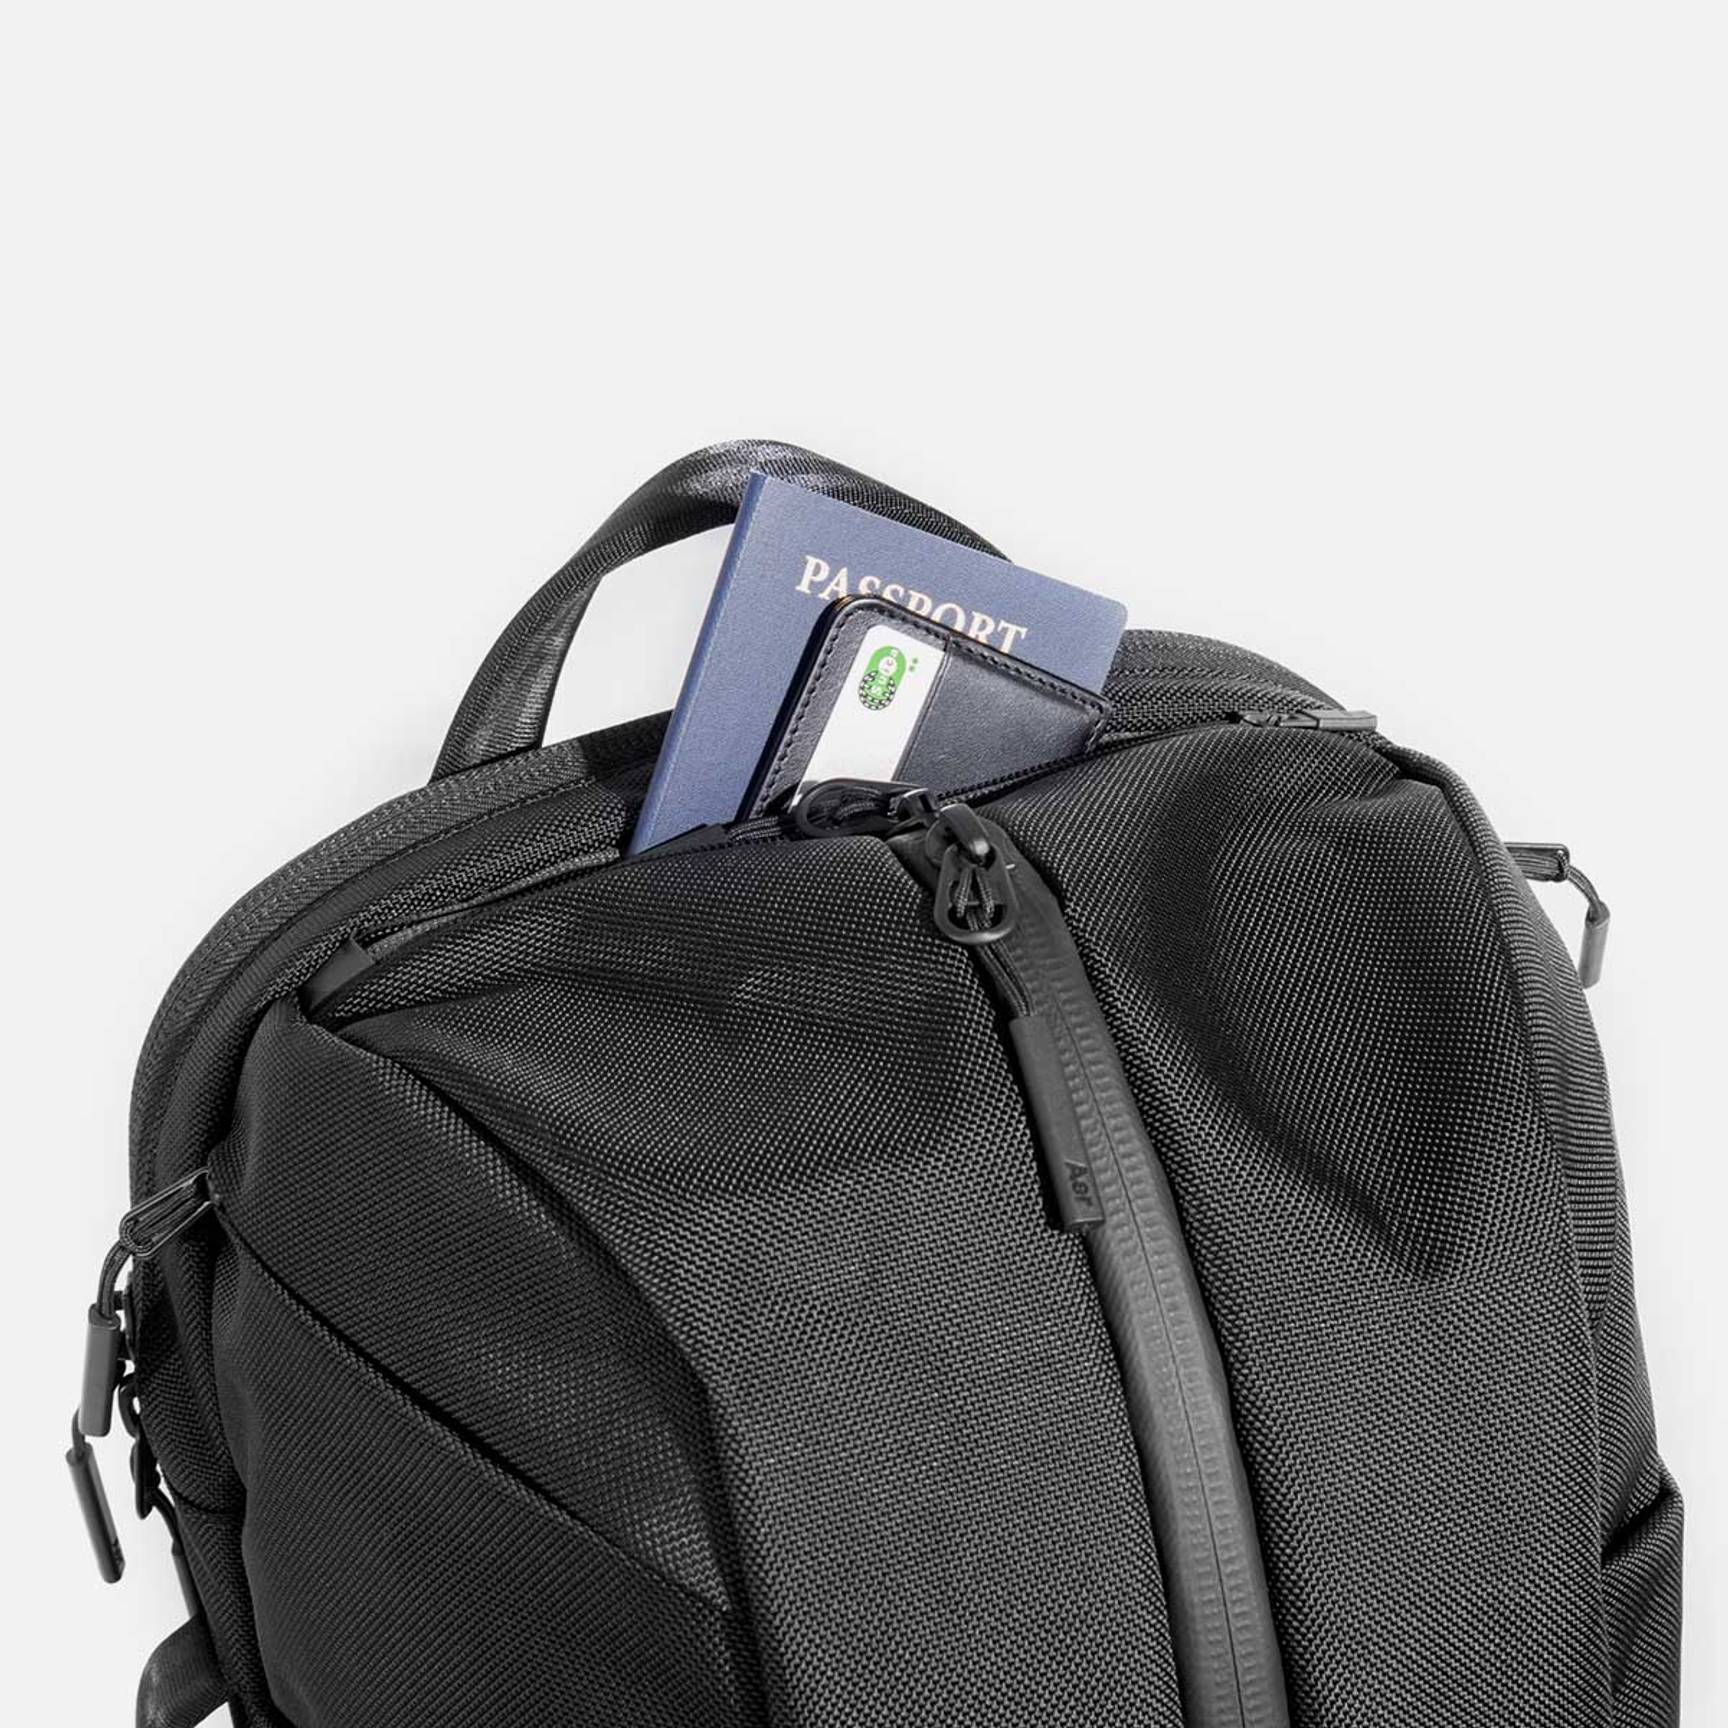 Under Armour Backpacks & Duffels as low as $12! (Today Only)